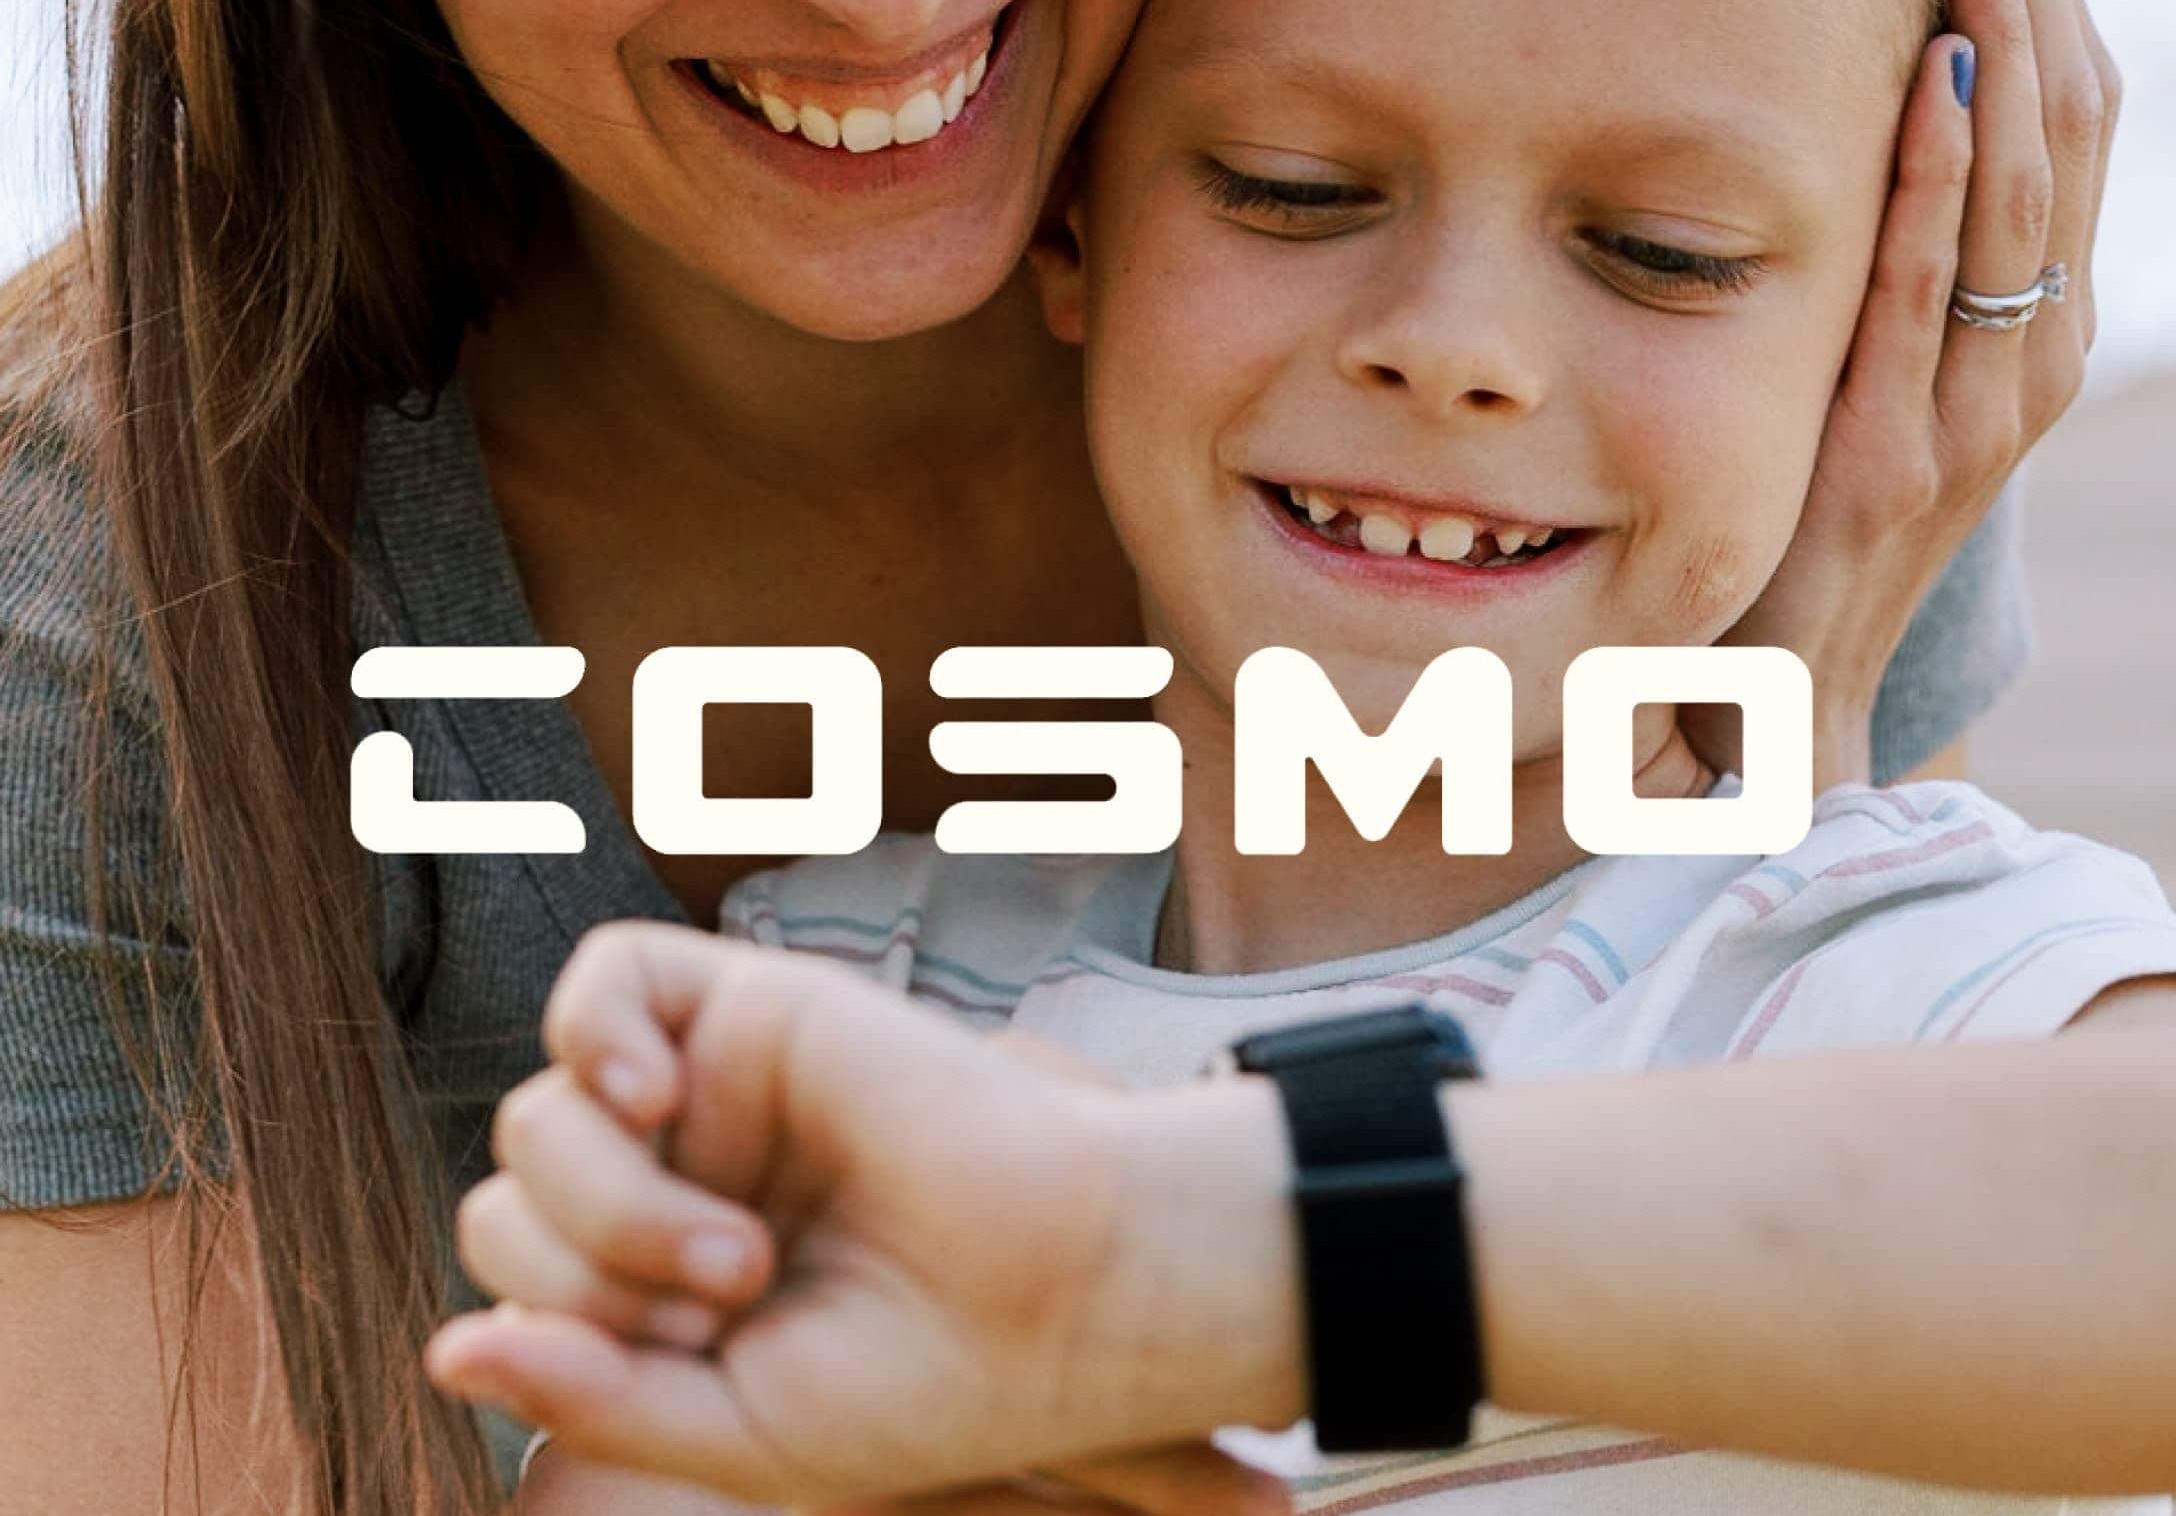  Telnyx enables reliable connectivity in COSMO smartwatches - IoT ONE Case Study